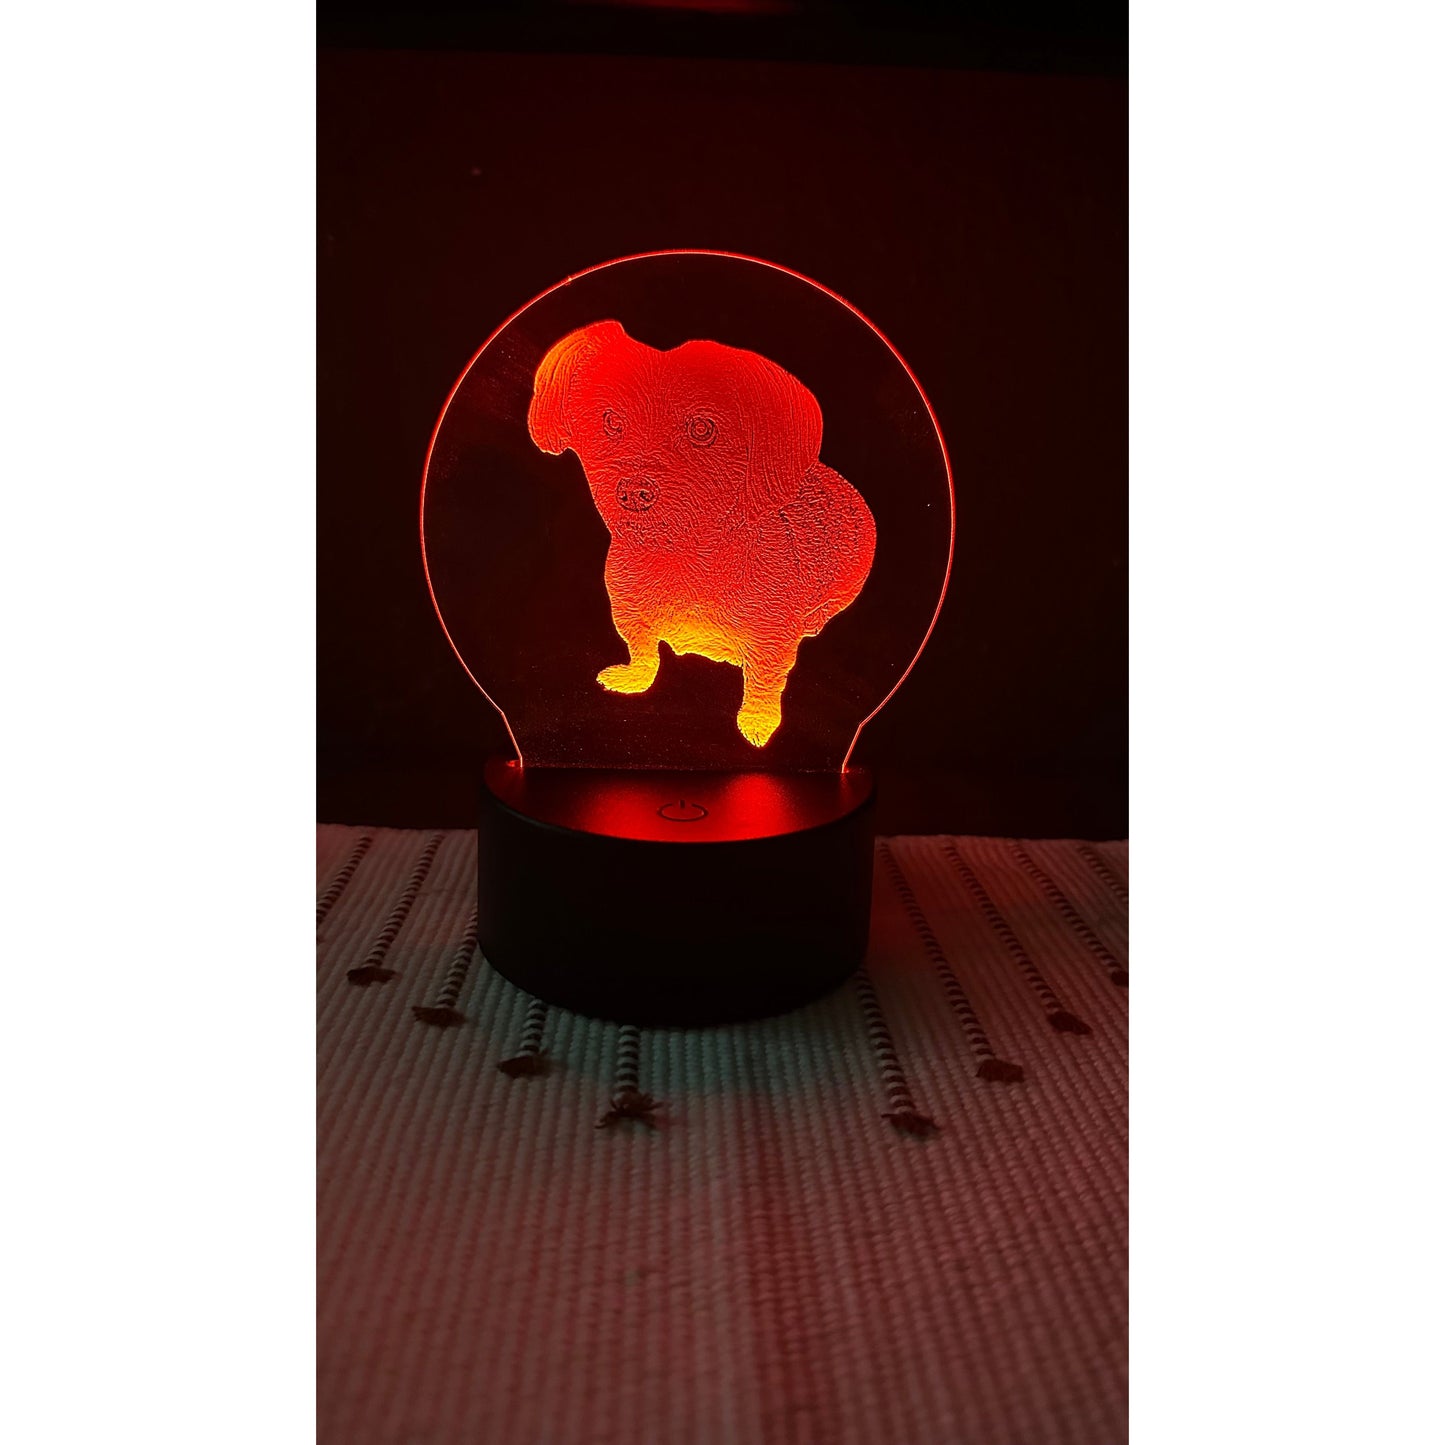 Custom Picture or Image Engraved in Acrylic with LED Light Base